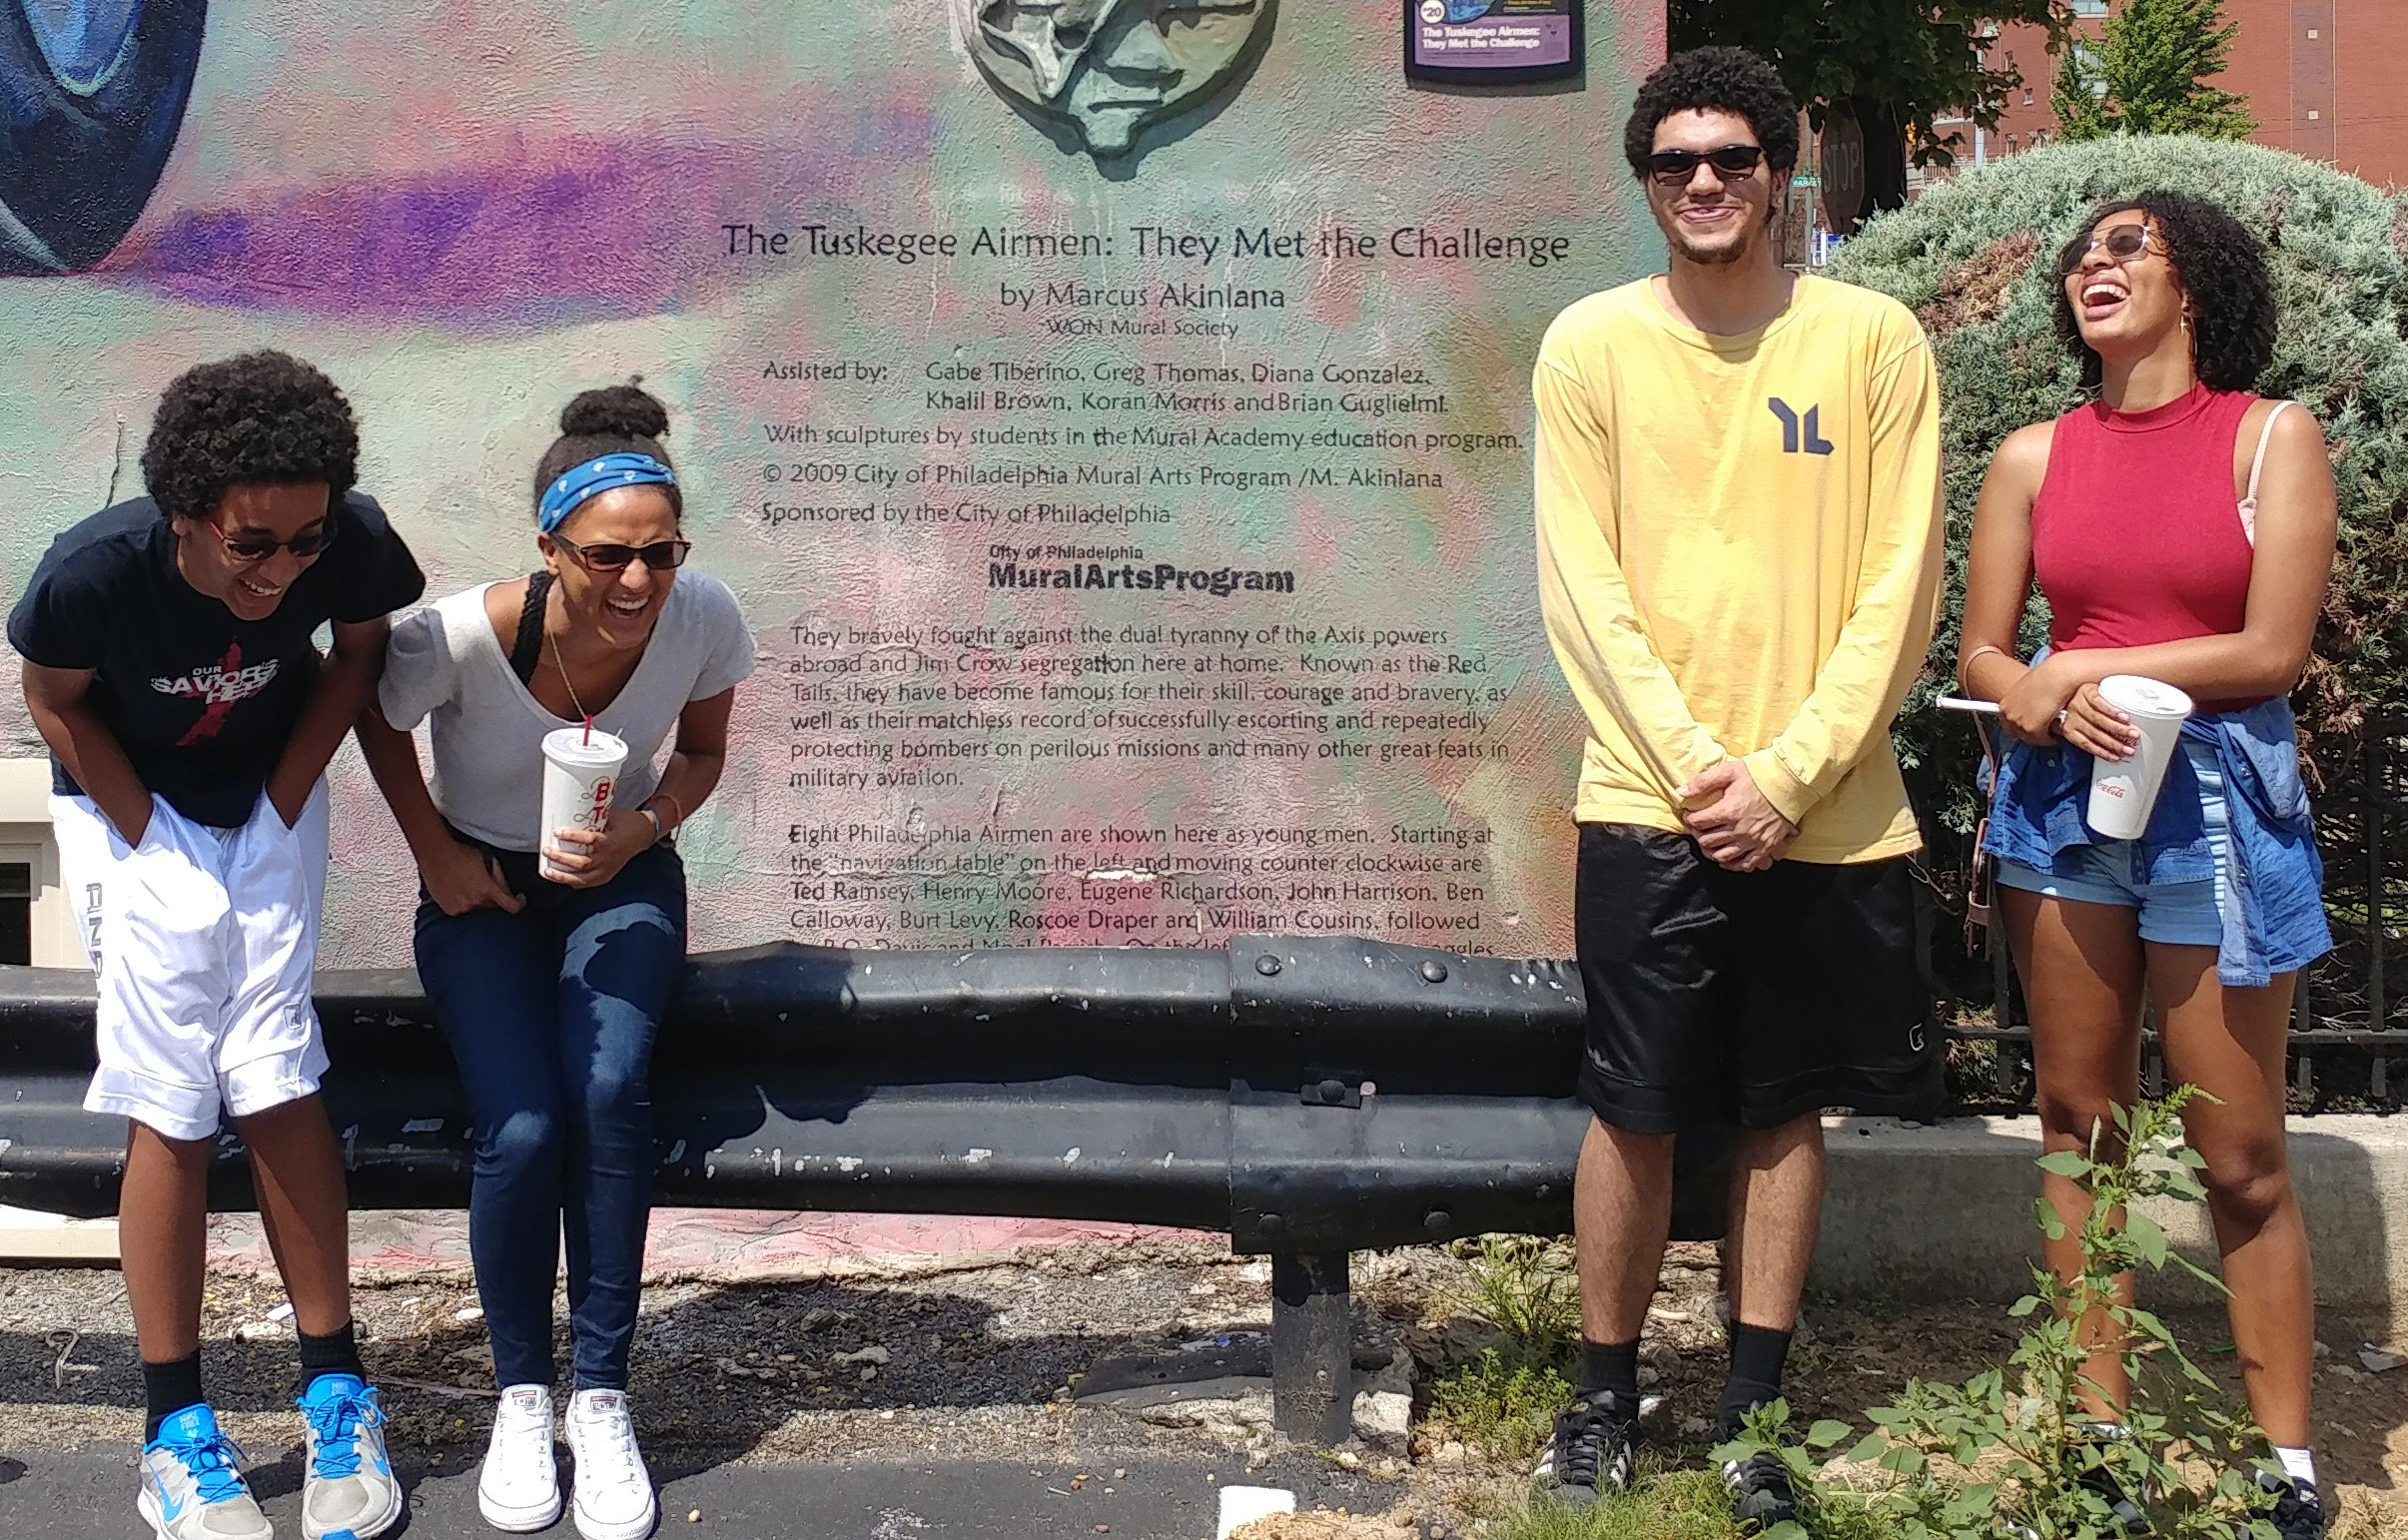 From left to right, JJ, Christiana, Daniel Jr., and Angelica during a trip to Philadelphia this summer.